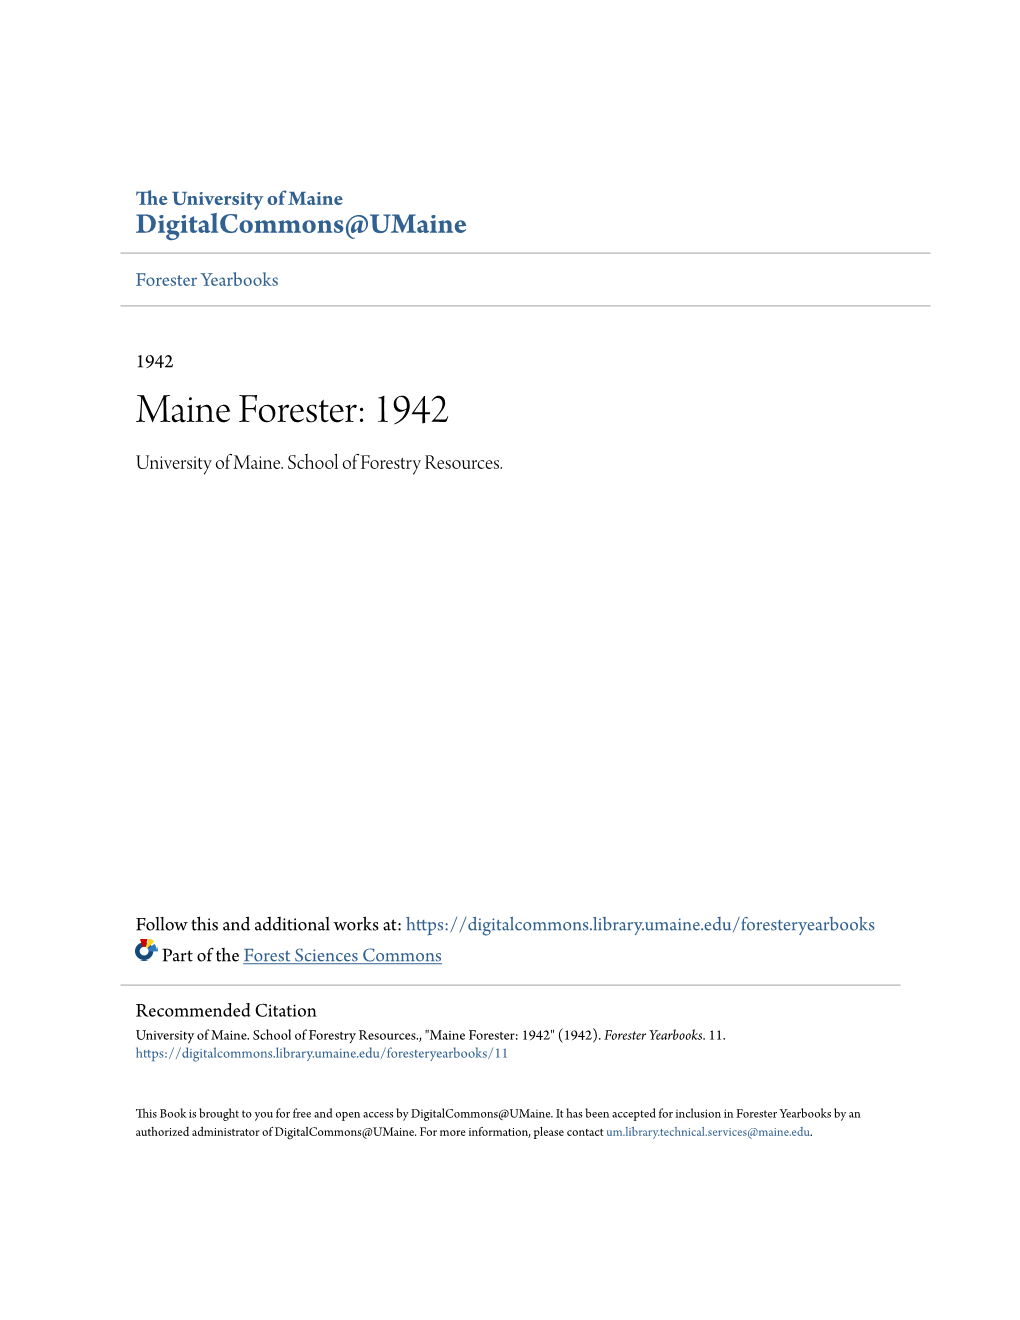 Maine Forester: 1942 University of Maine